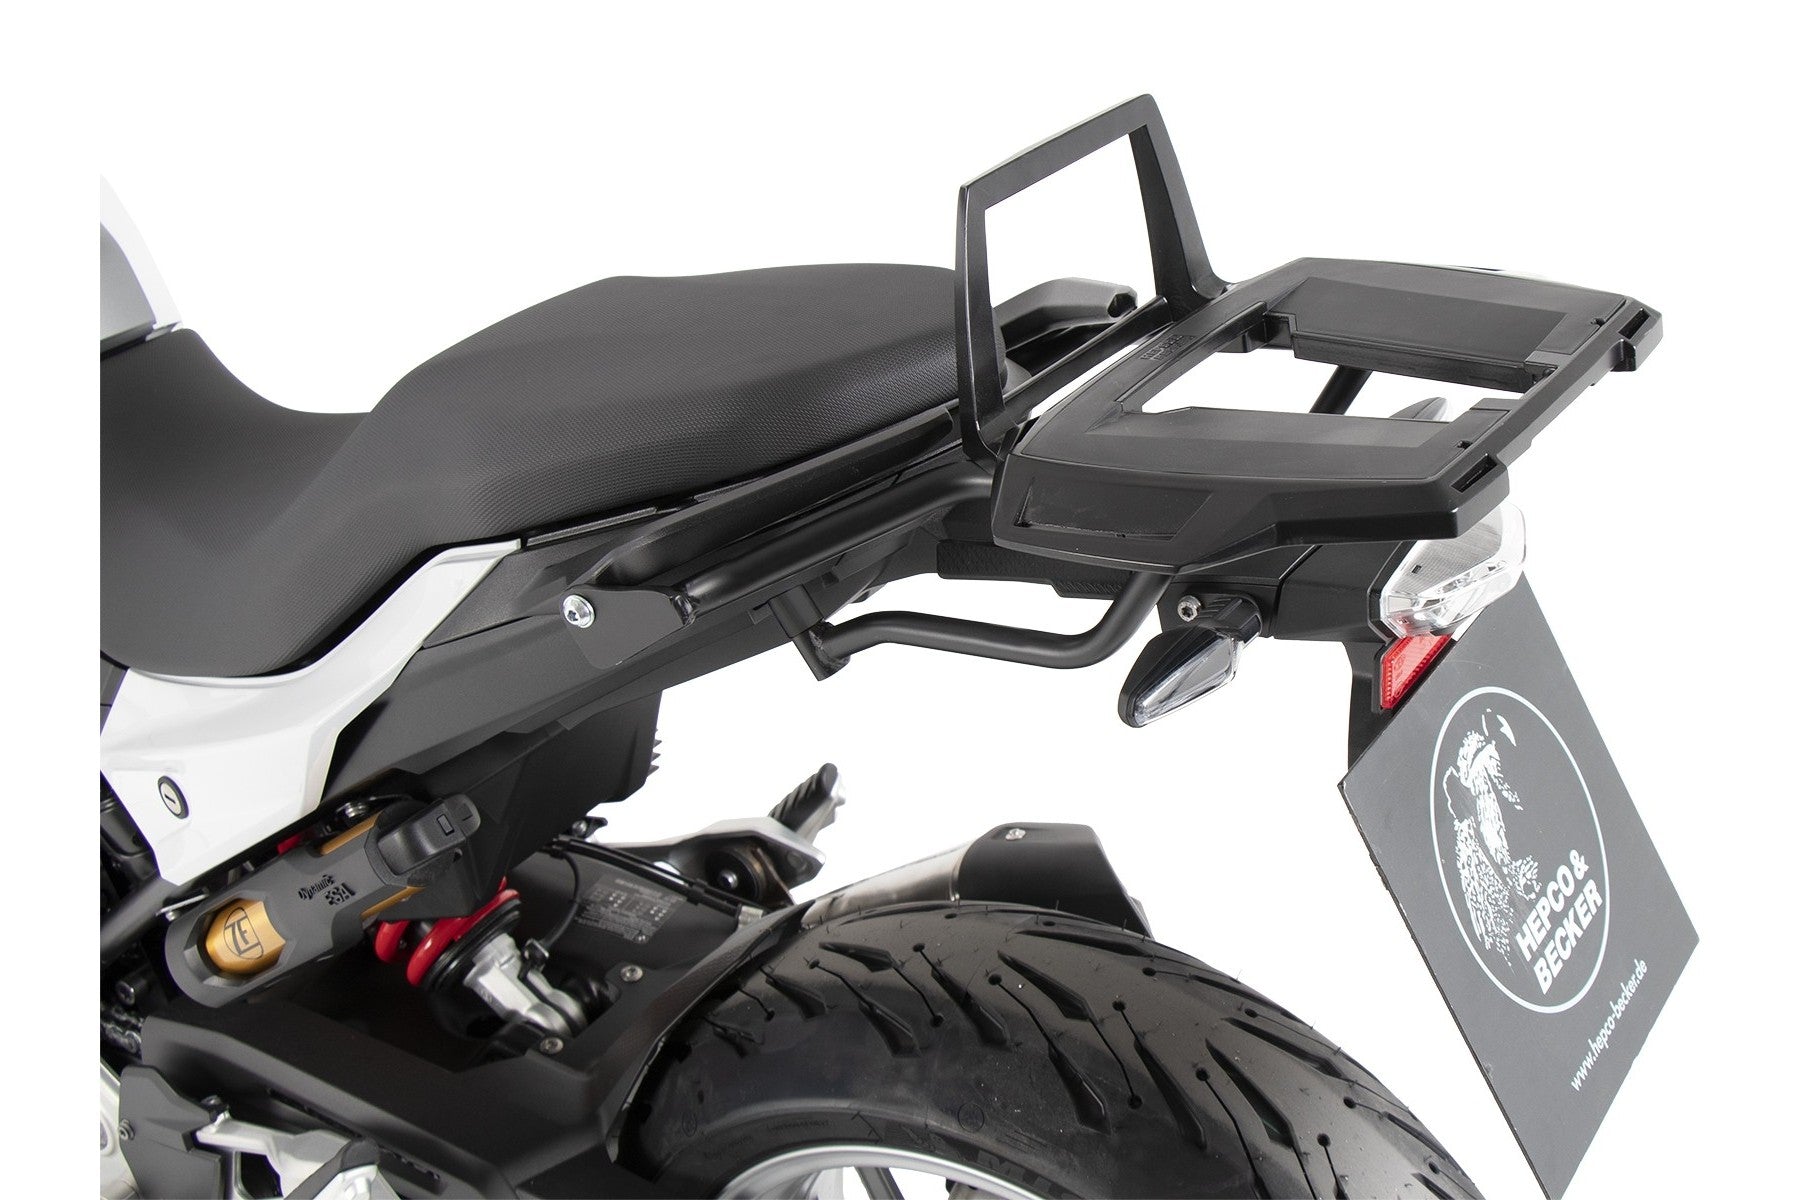 BMW F 900 Carrier - Top Case Carrier